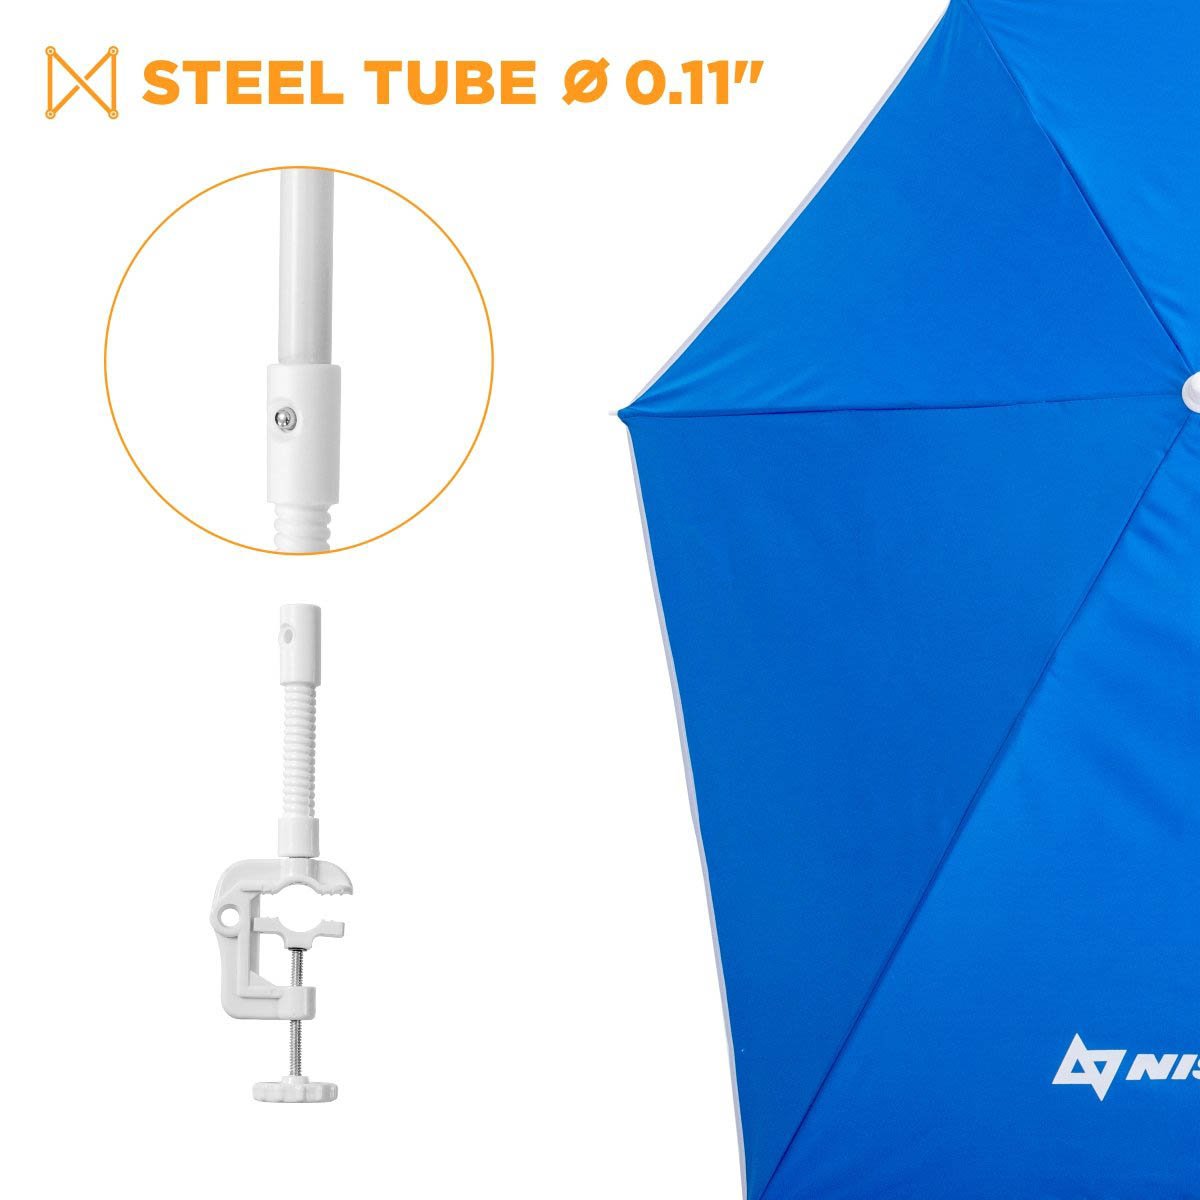 Strong Clip-On Adjustable Beach Umbrella featuring a 0.11 inches steel pole